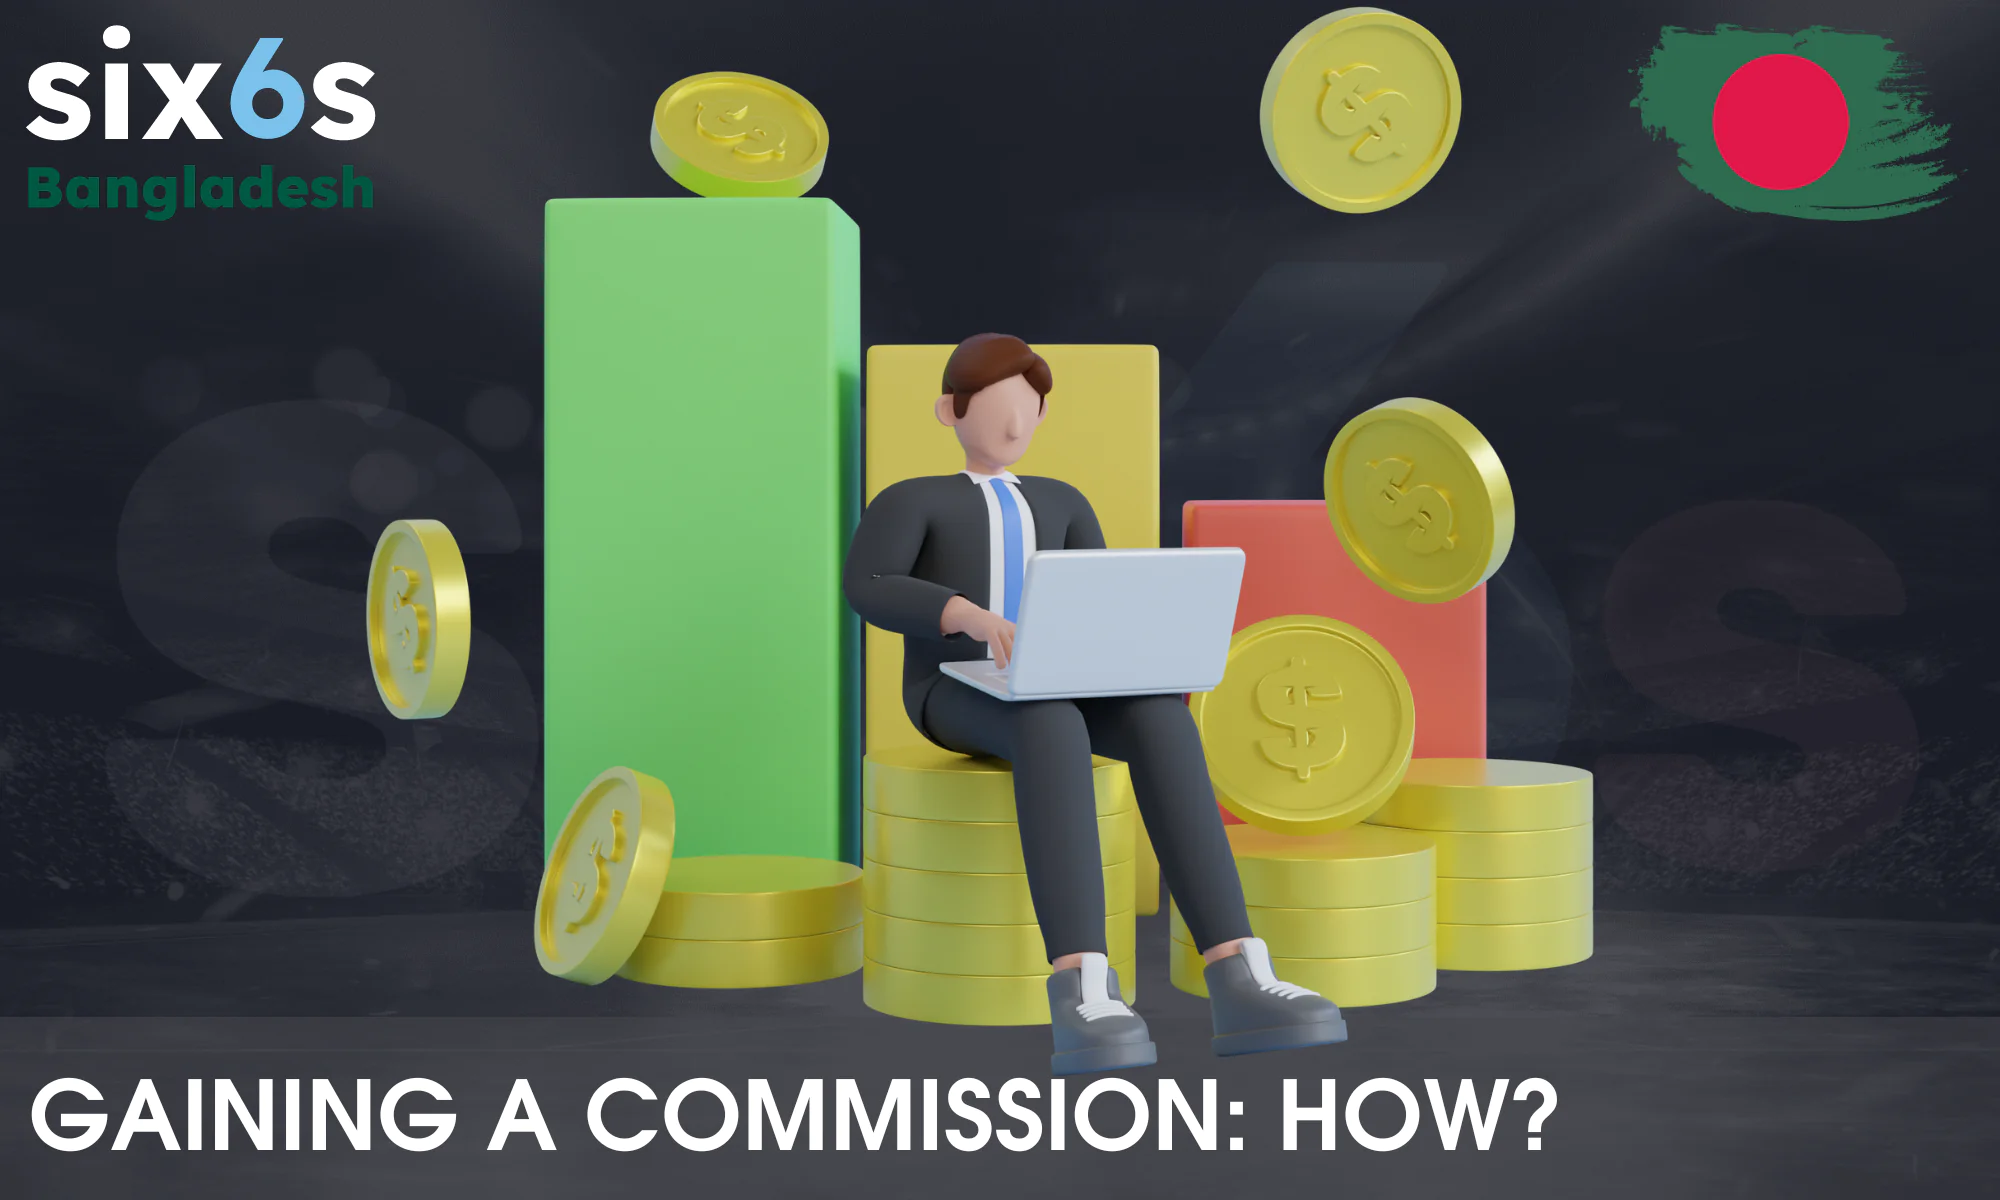 Read more about how to get a commission for referrals in Six6s